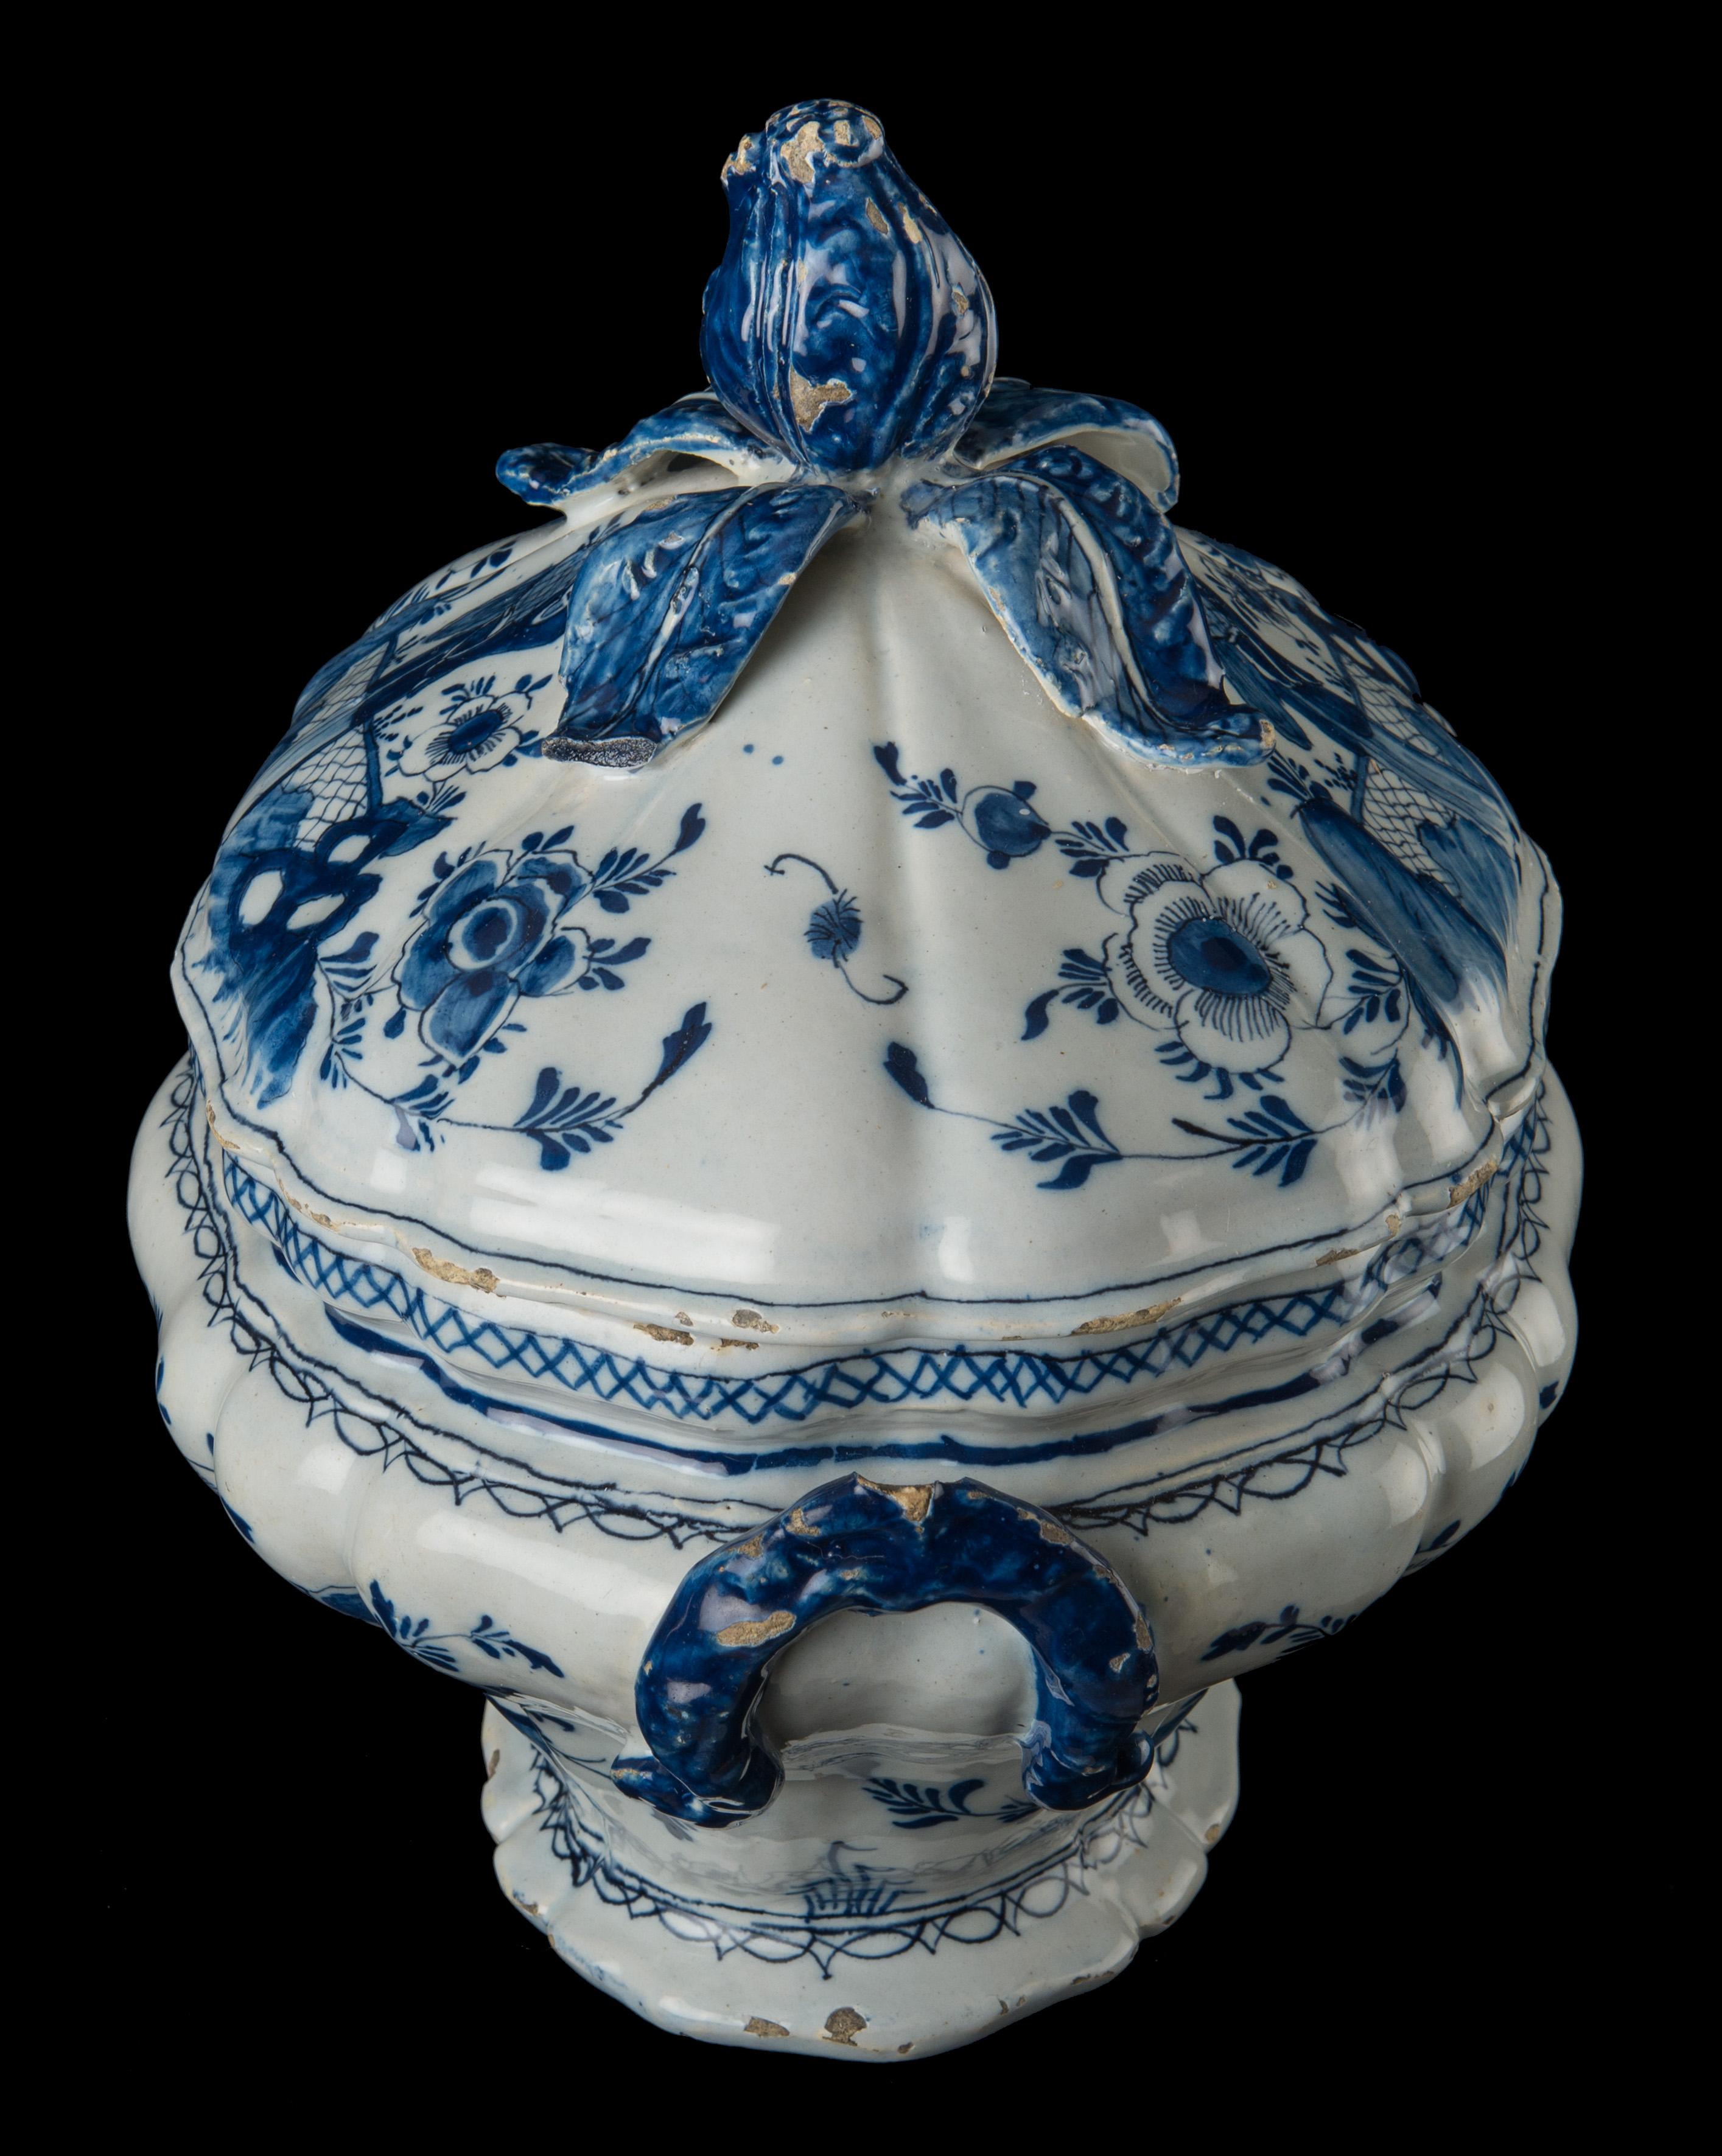 The blue and white oval-shaped tureen has a curved body on a spreading foot and two blue-colored foliate loop handles. The knob on the cover is modelled as a flower with four leaves. The tureen and cover are painted on either side with a Chinese